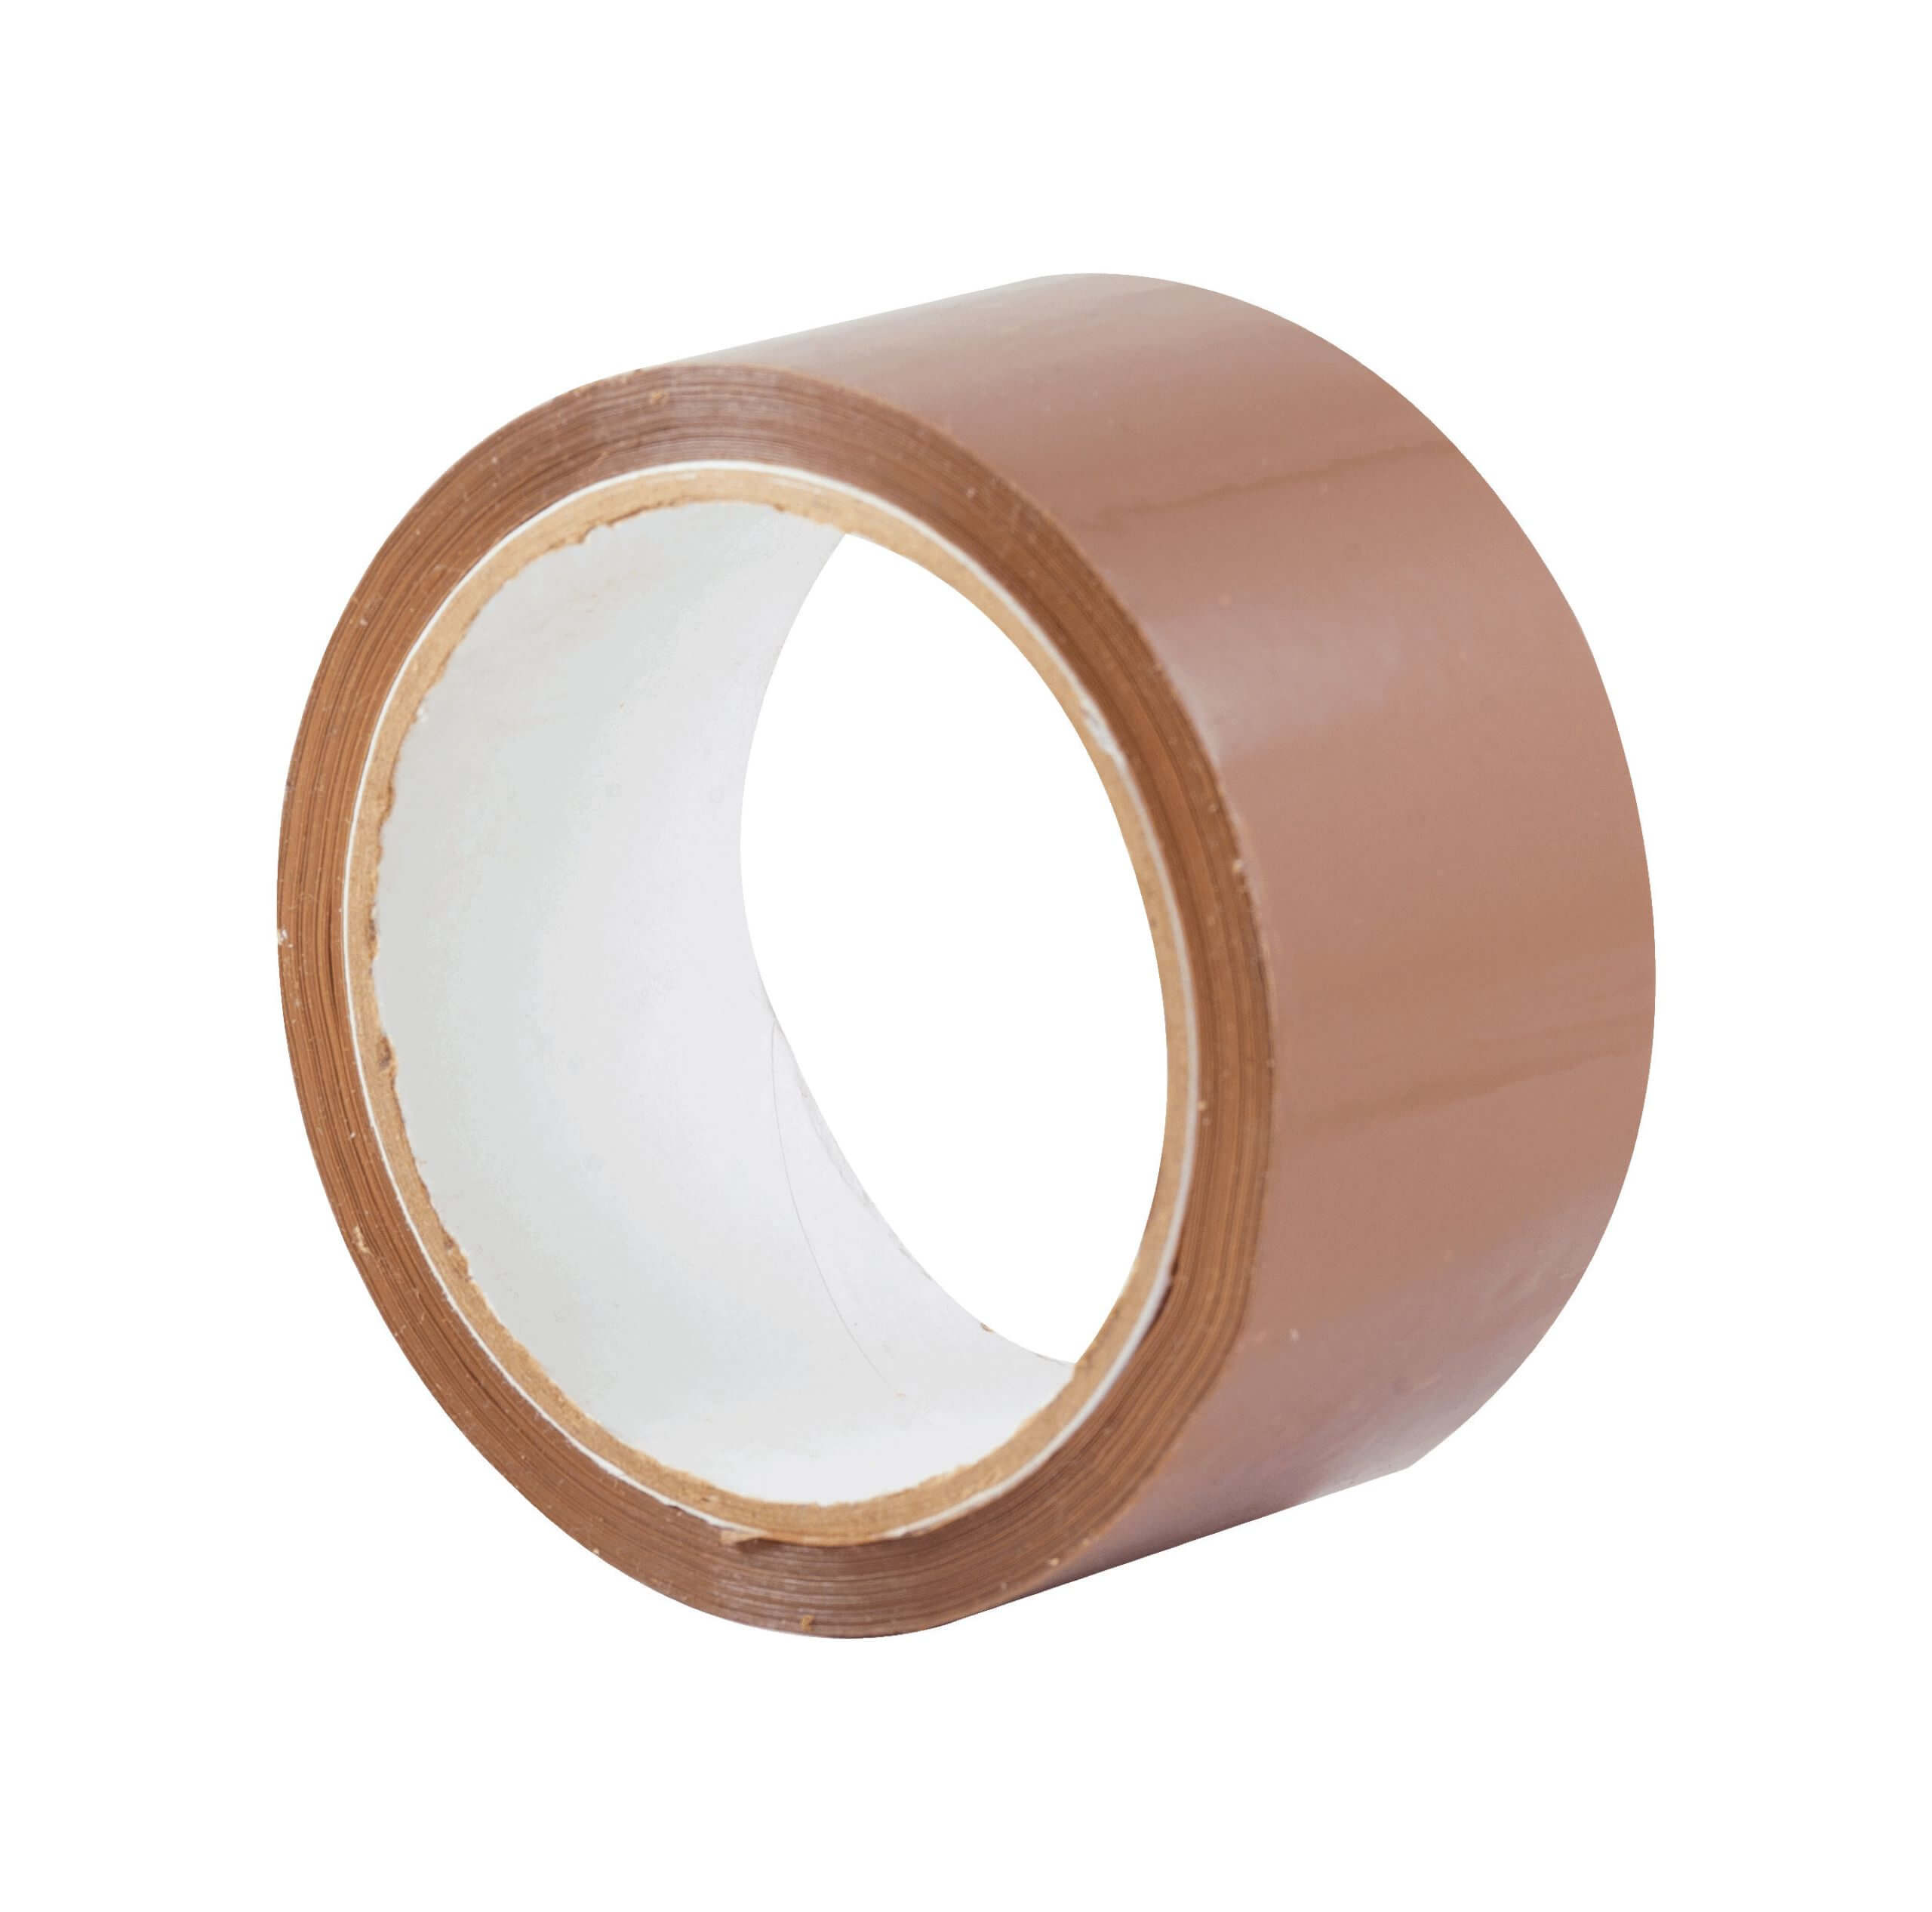 An image of our Solvent Adhesive Tape.